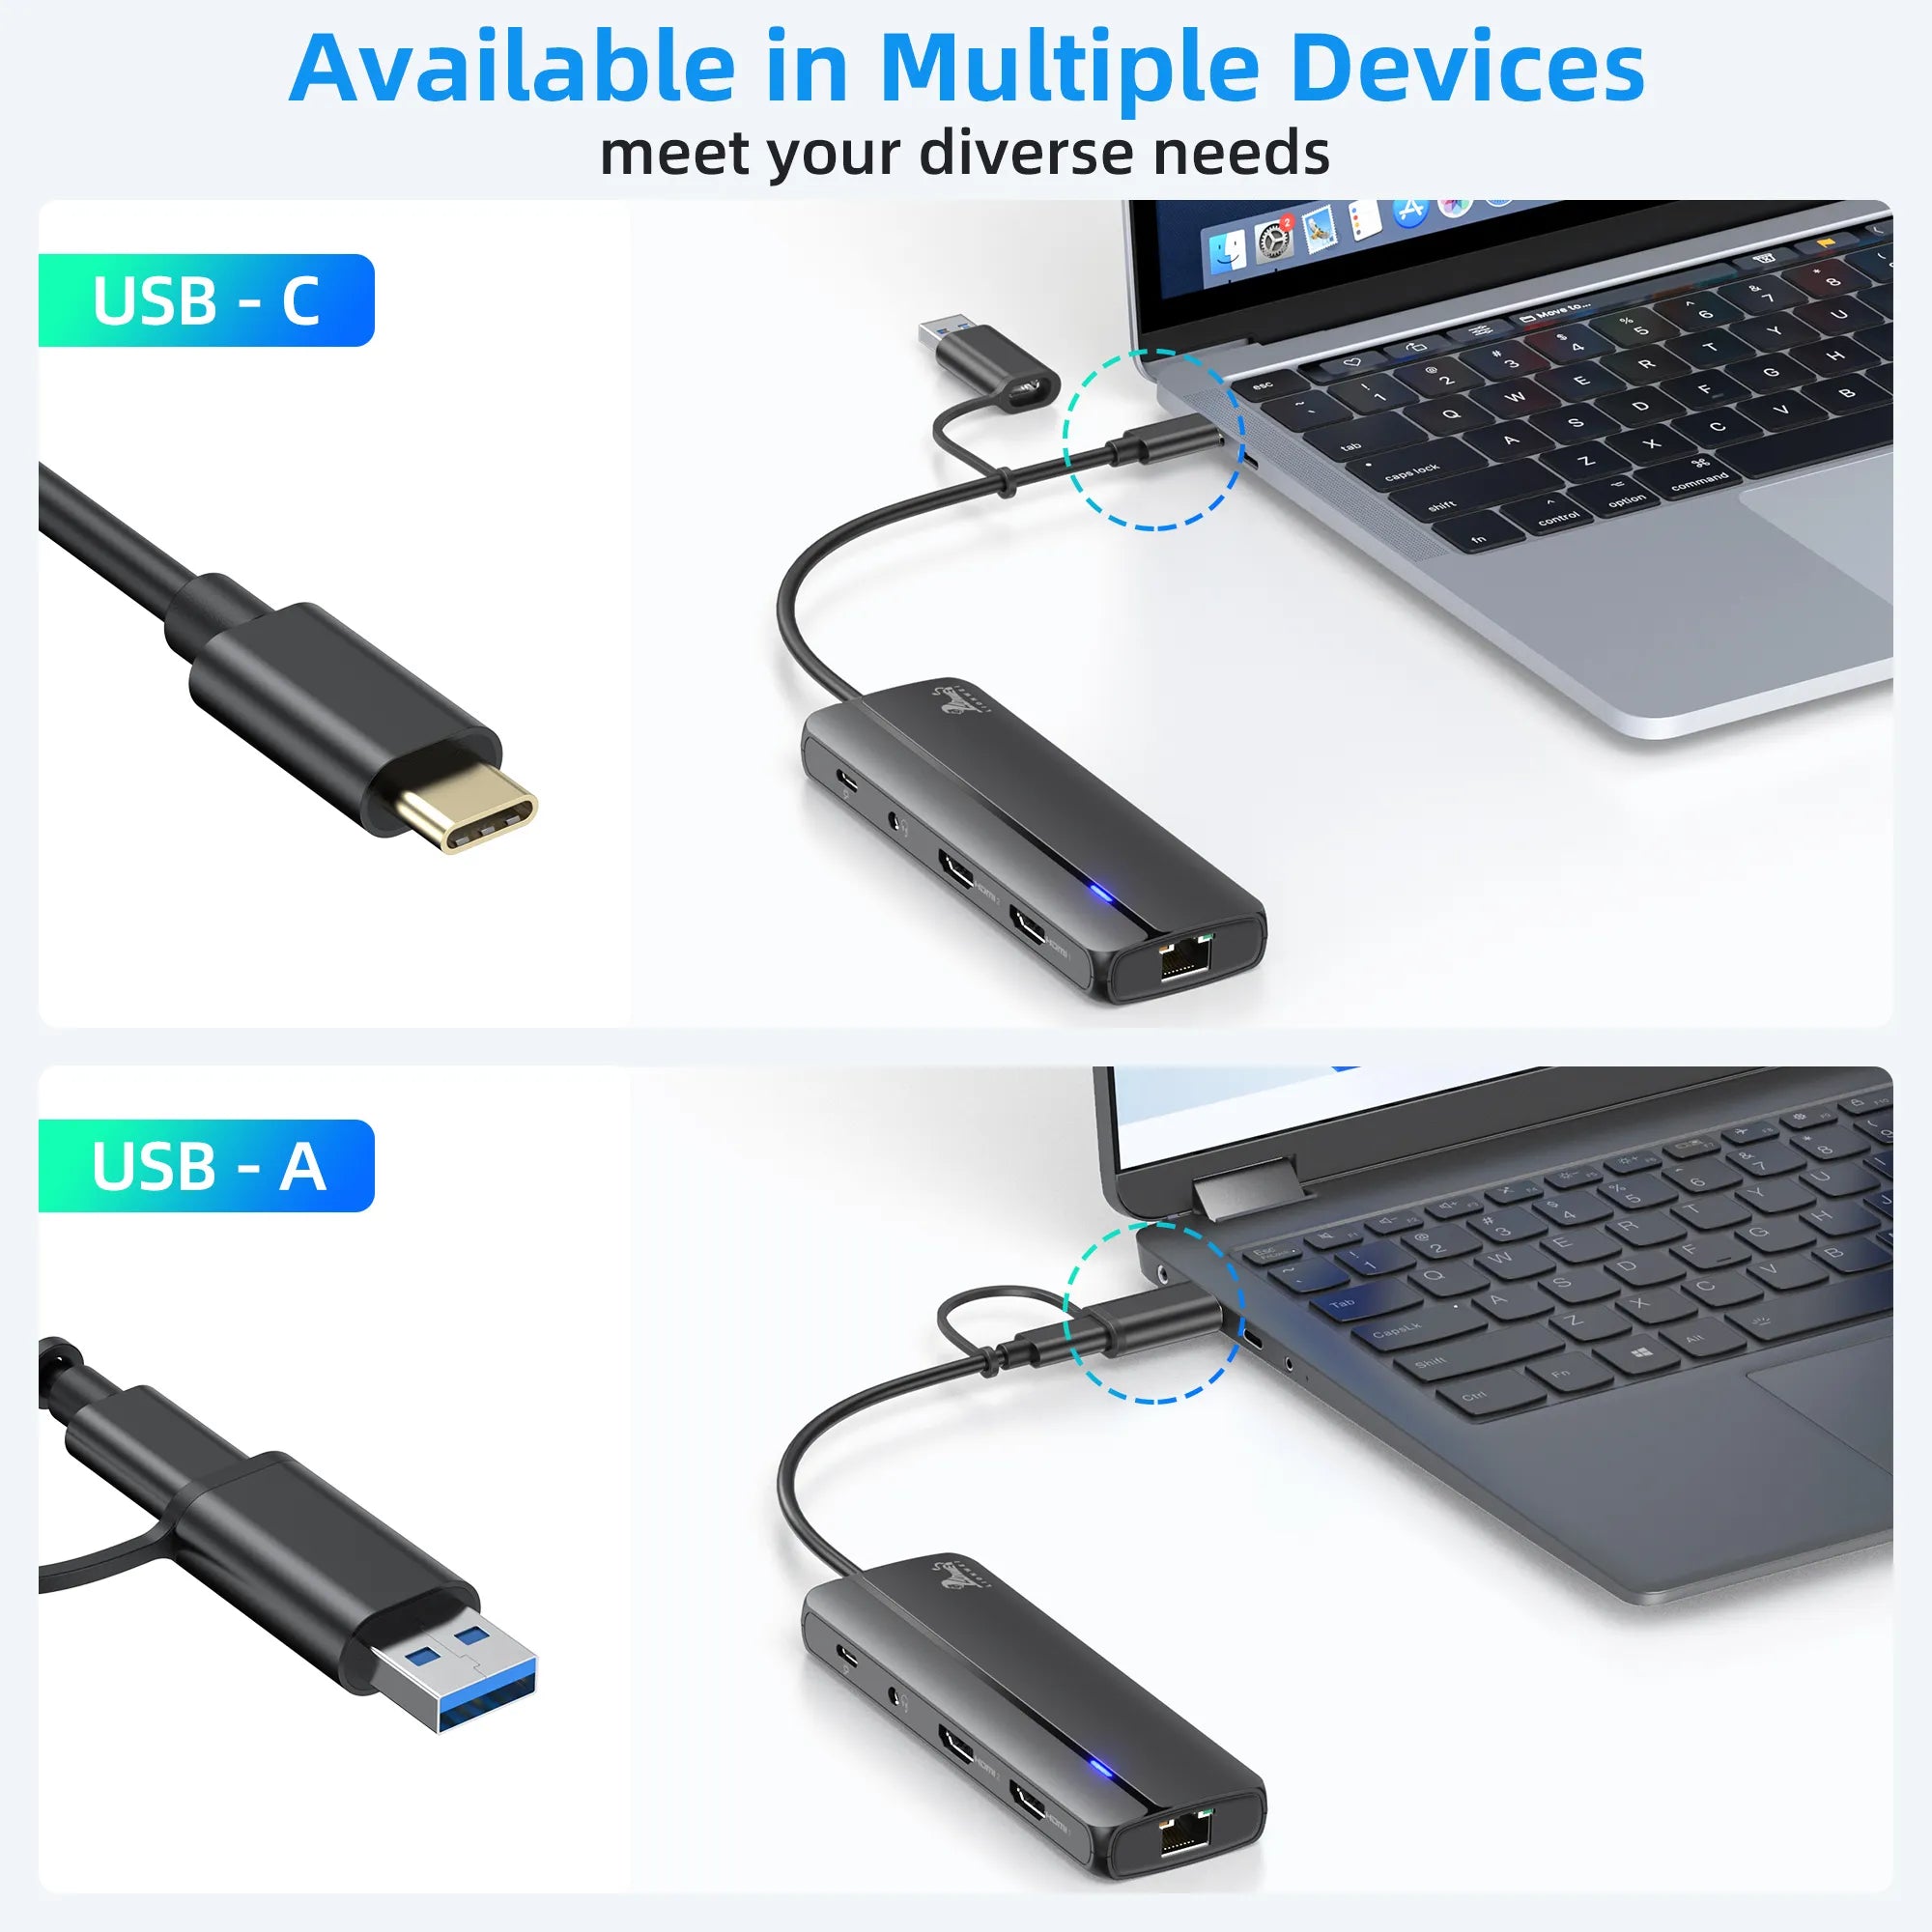 Switch USB-C and USB-A Available in Multiple Devices